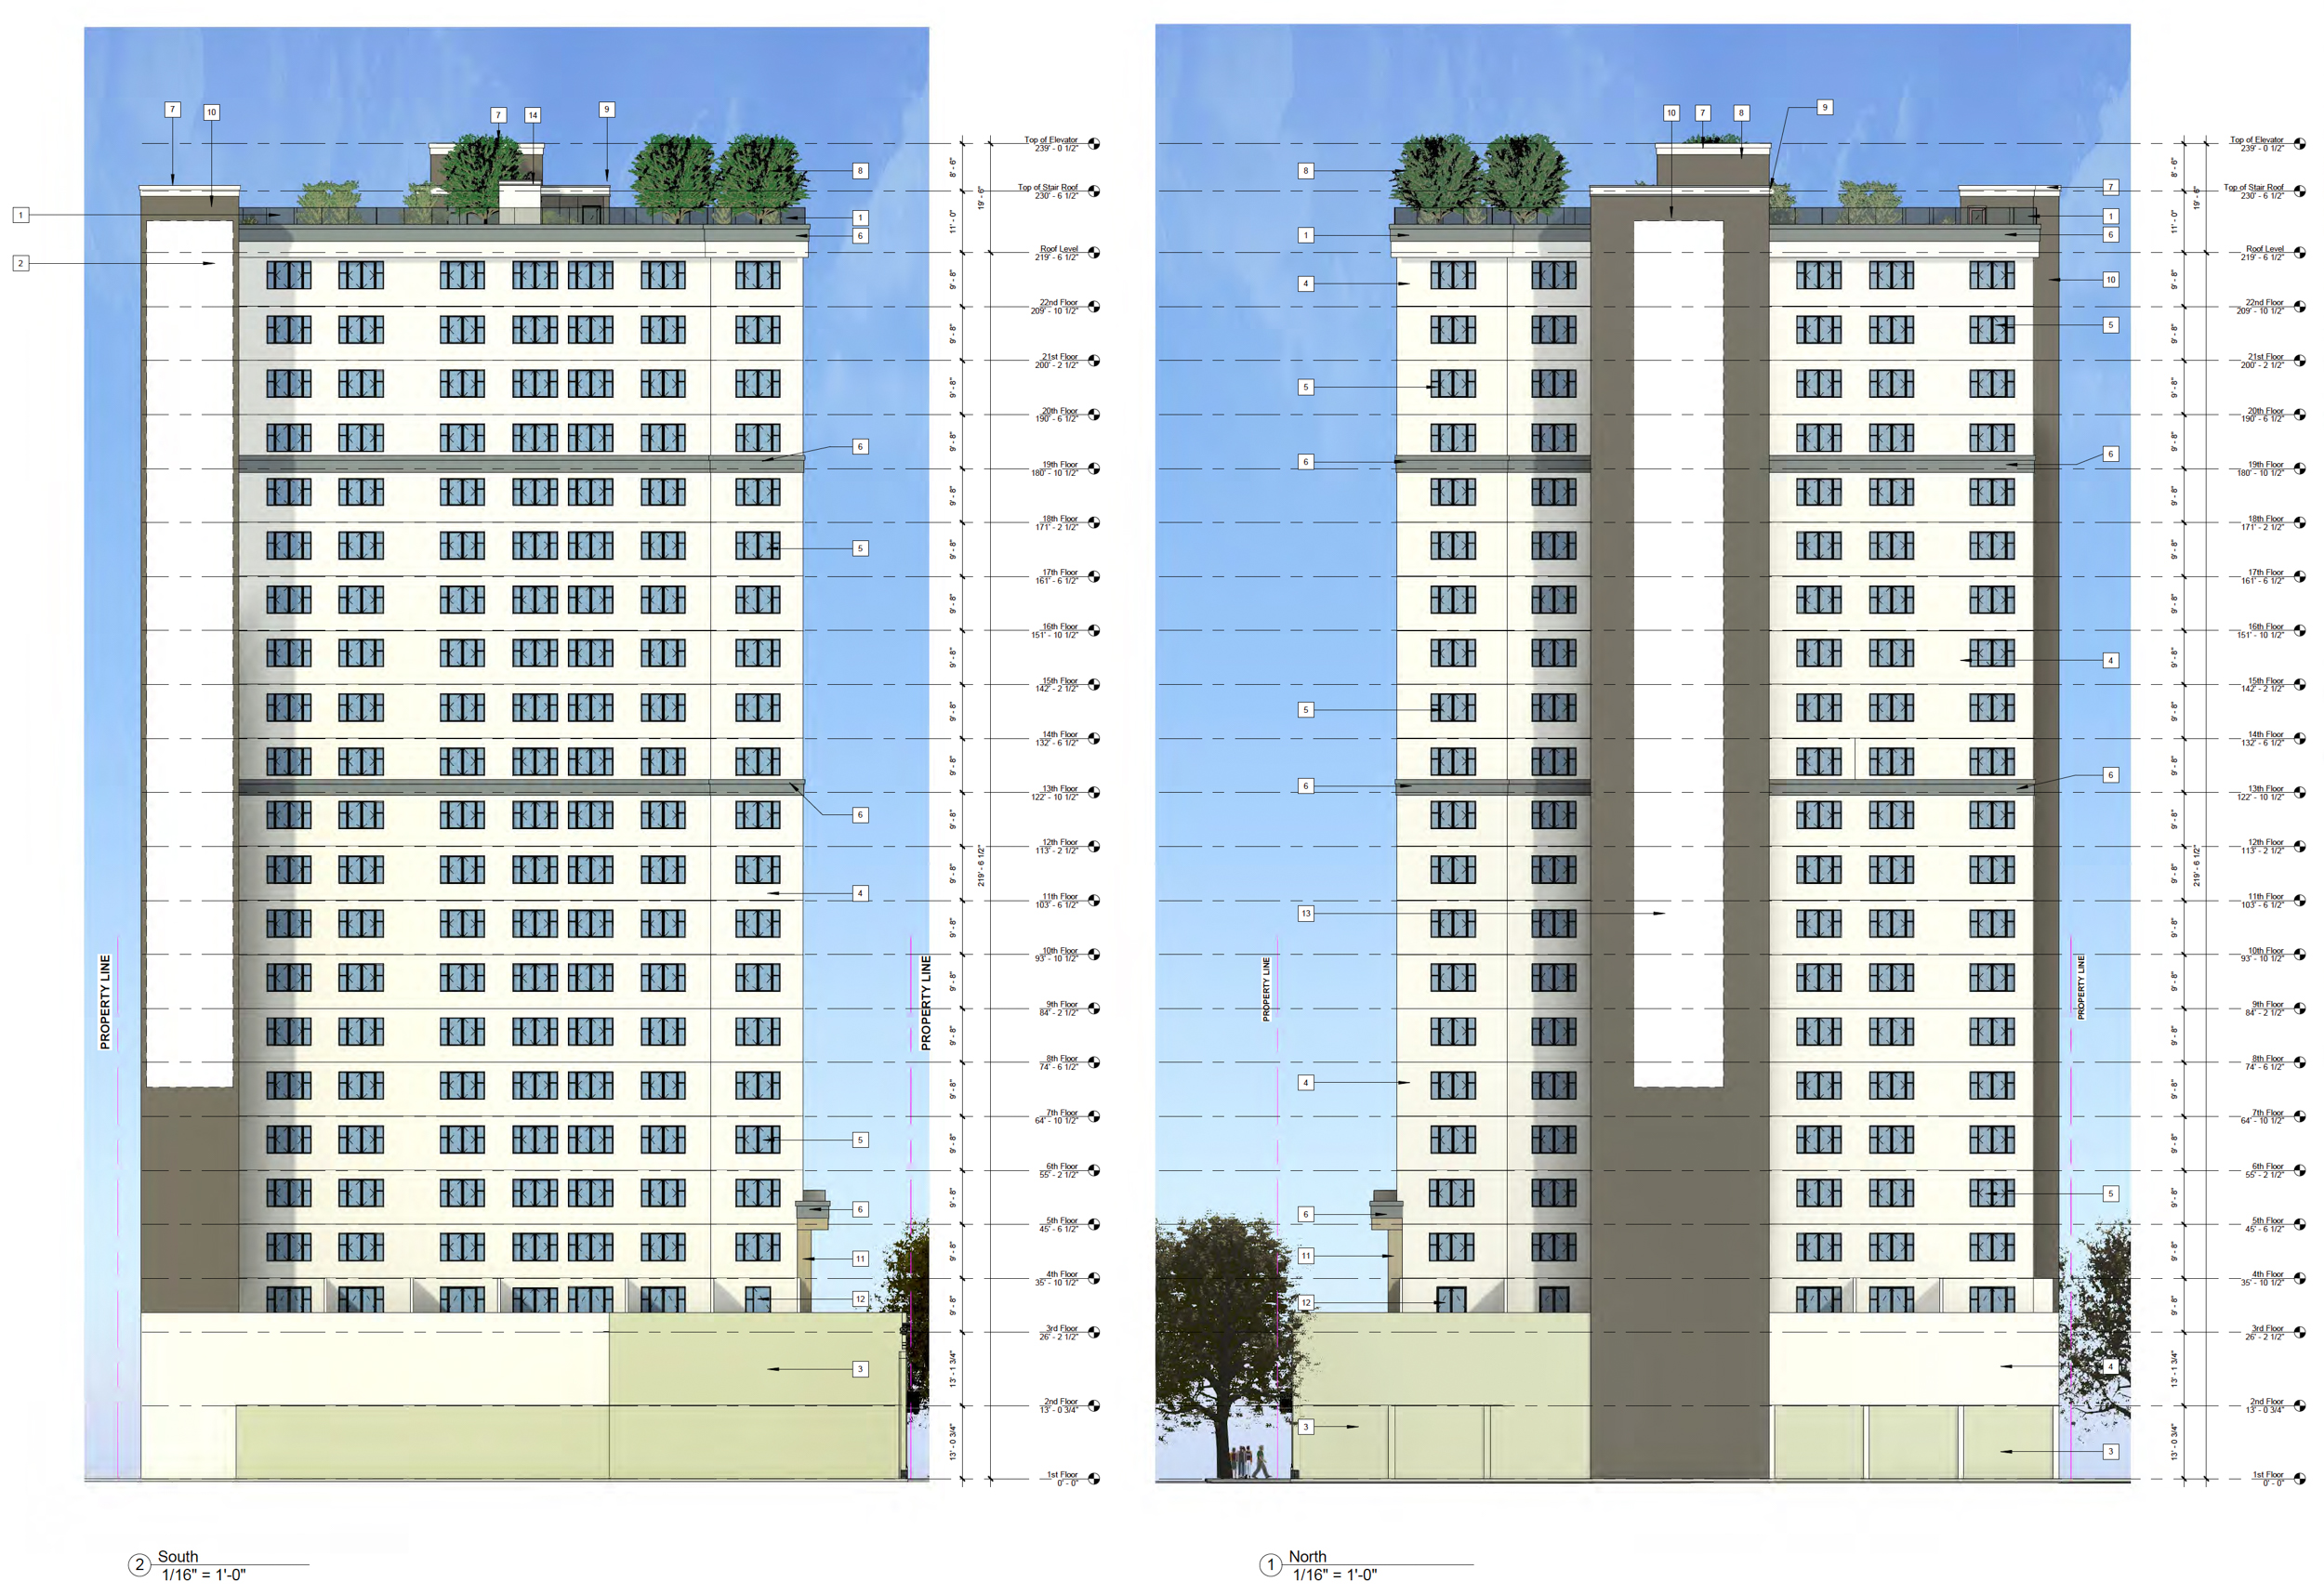 19 North 2nd Street facade elevations of the North and South faces, illustration by Anderson Architects